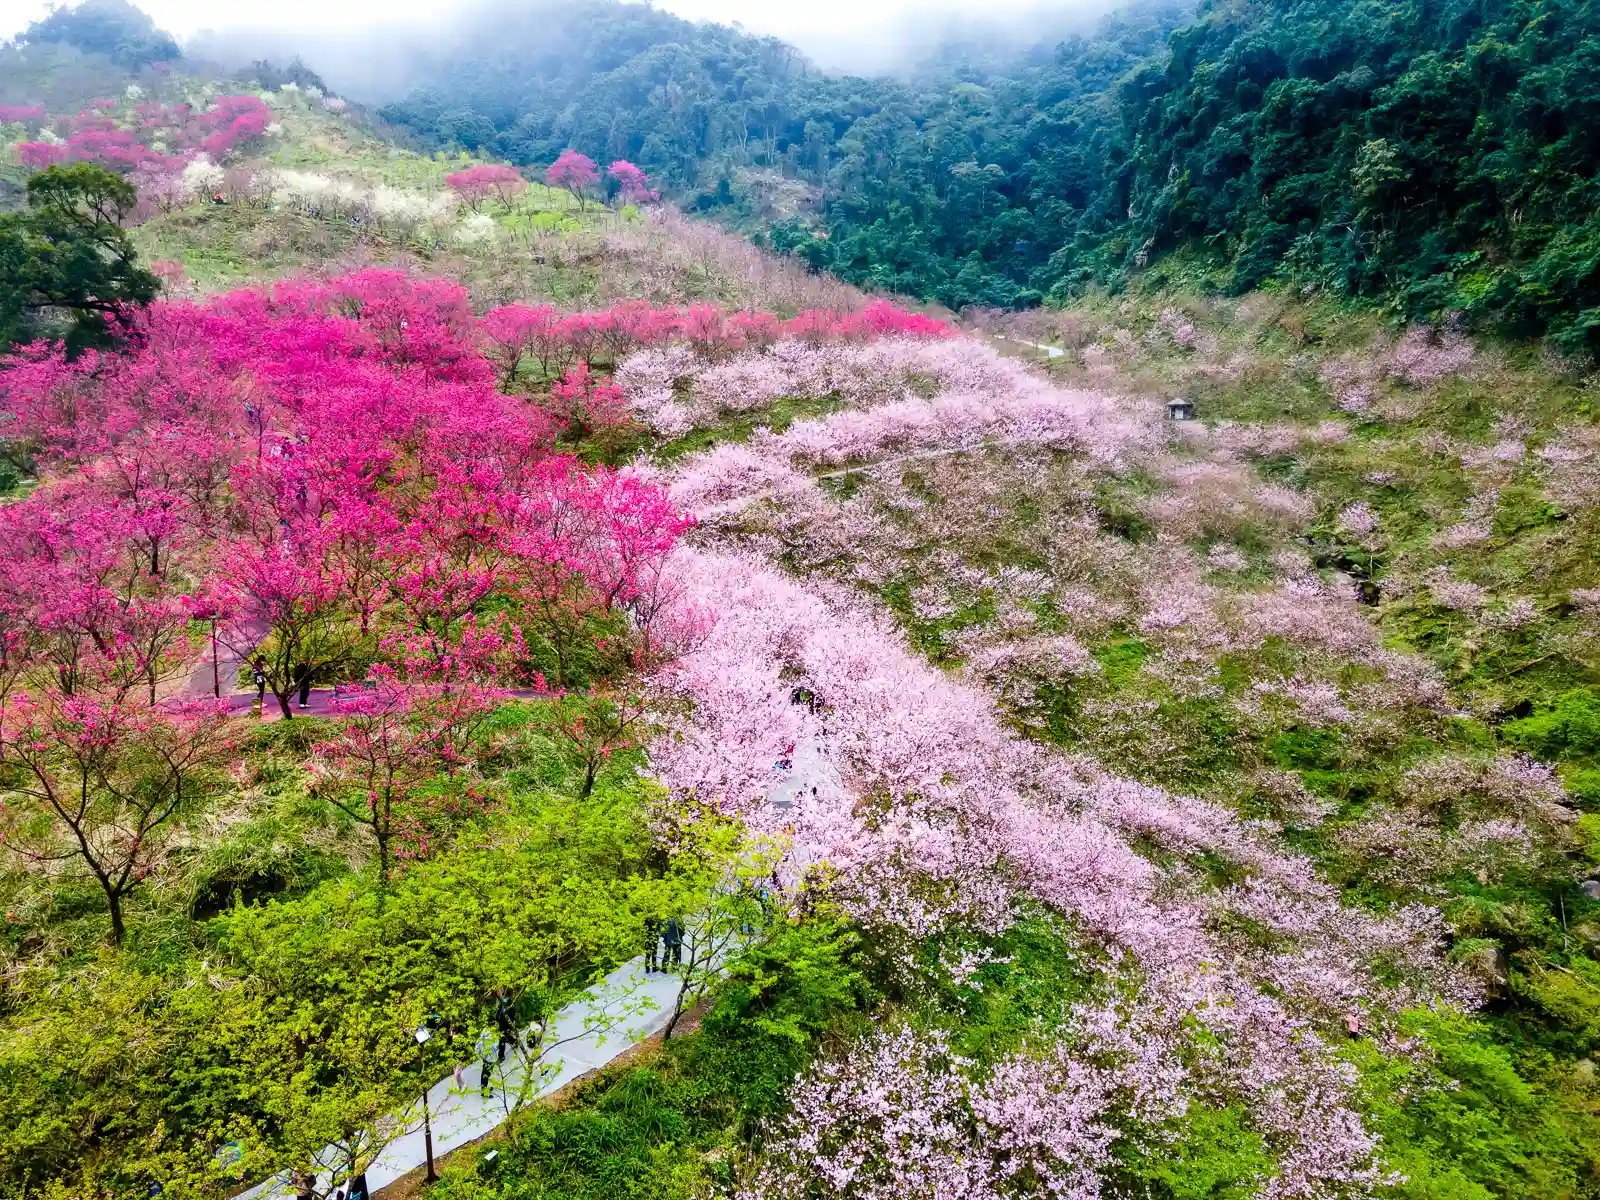 In this drone shot, fields of white and red cherry trees are visible on a mountainside.